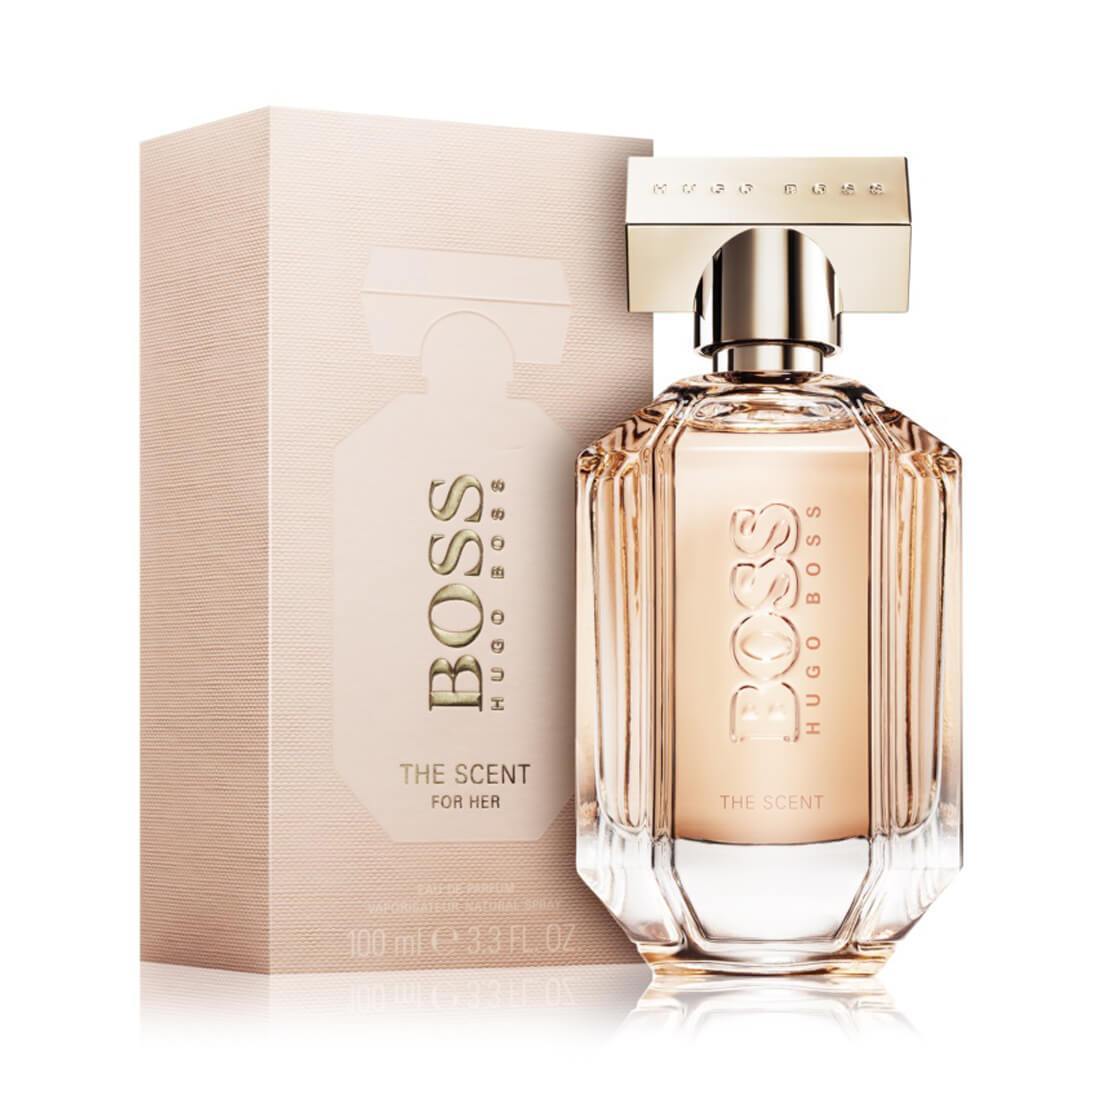 hugo boss the scent perfume review